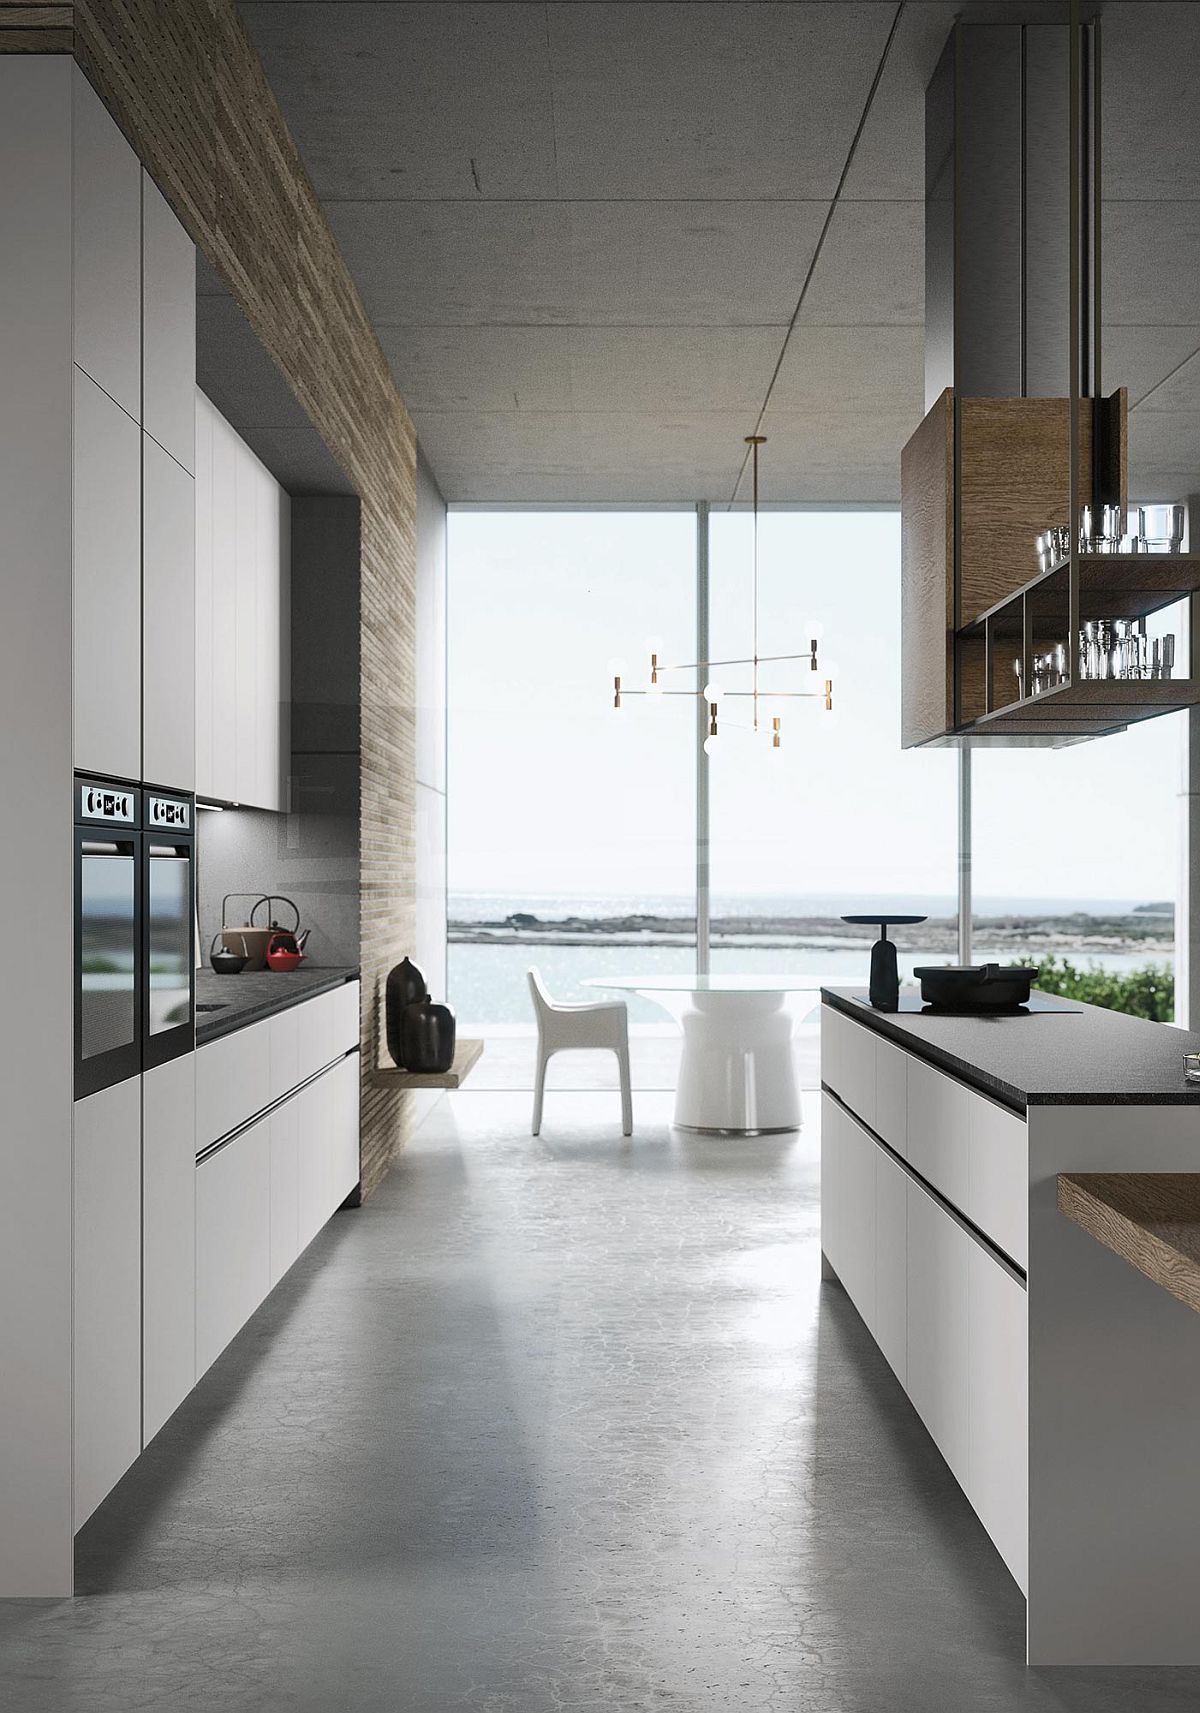 Recessed finger pulls and handleless doors shape a lovely minimal kitchen